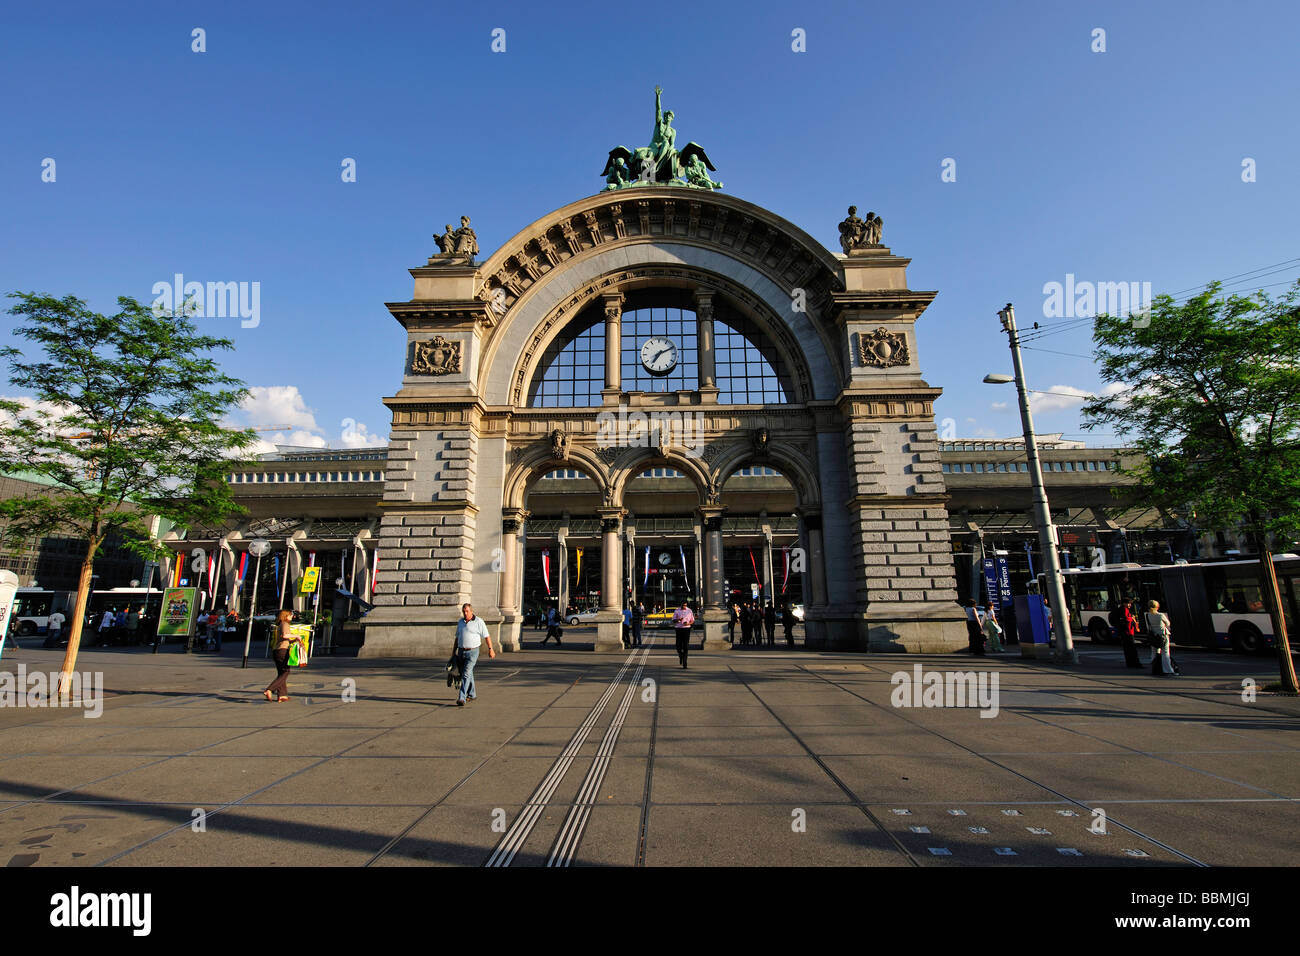 Entrance of the main train station in Lucerne, Canton of Lucerne, Switzerland, Europe Stock Photo